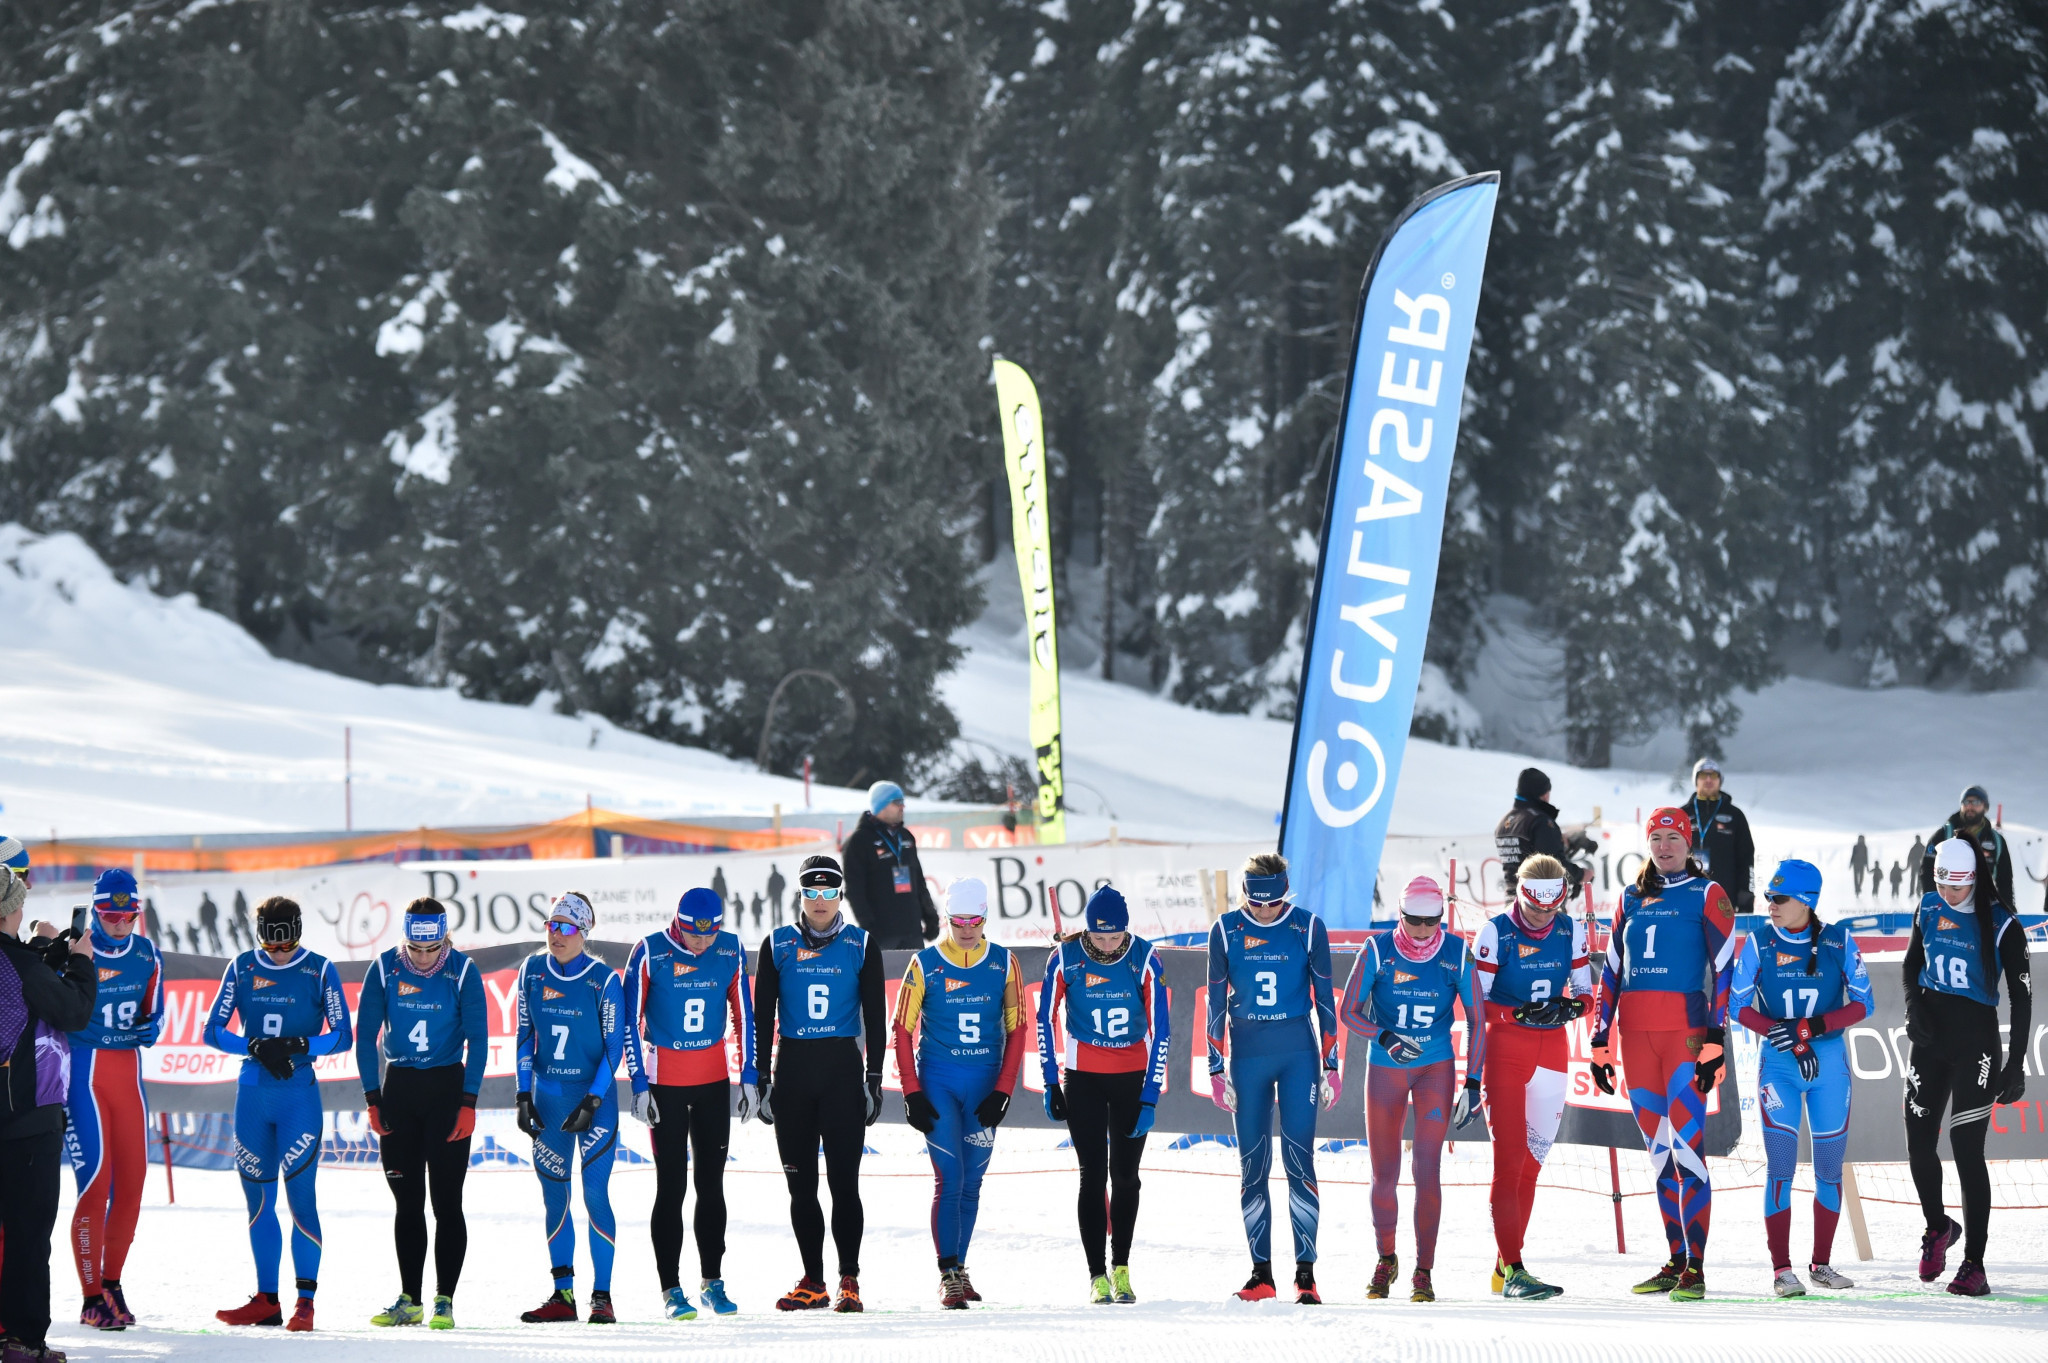 The International Triathlon Union has announced that Asiago in Italy will host the Winter Triathlon World Championships for a second consecutive year in 2020 ©ITU